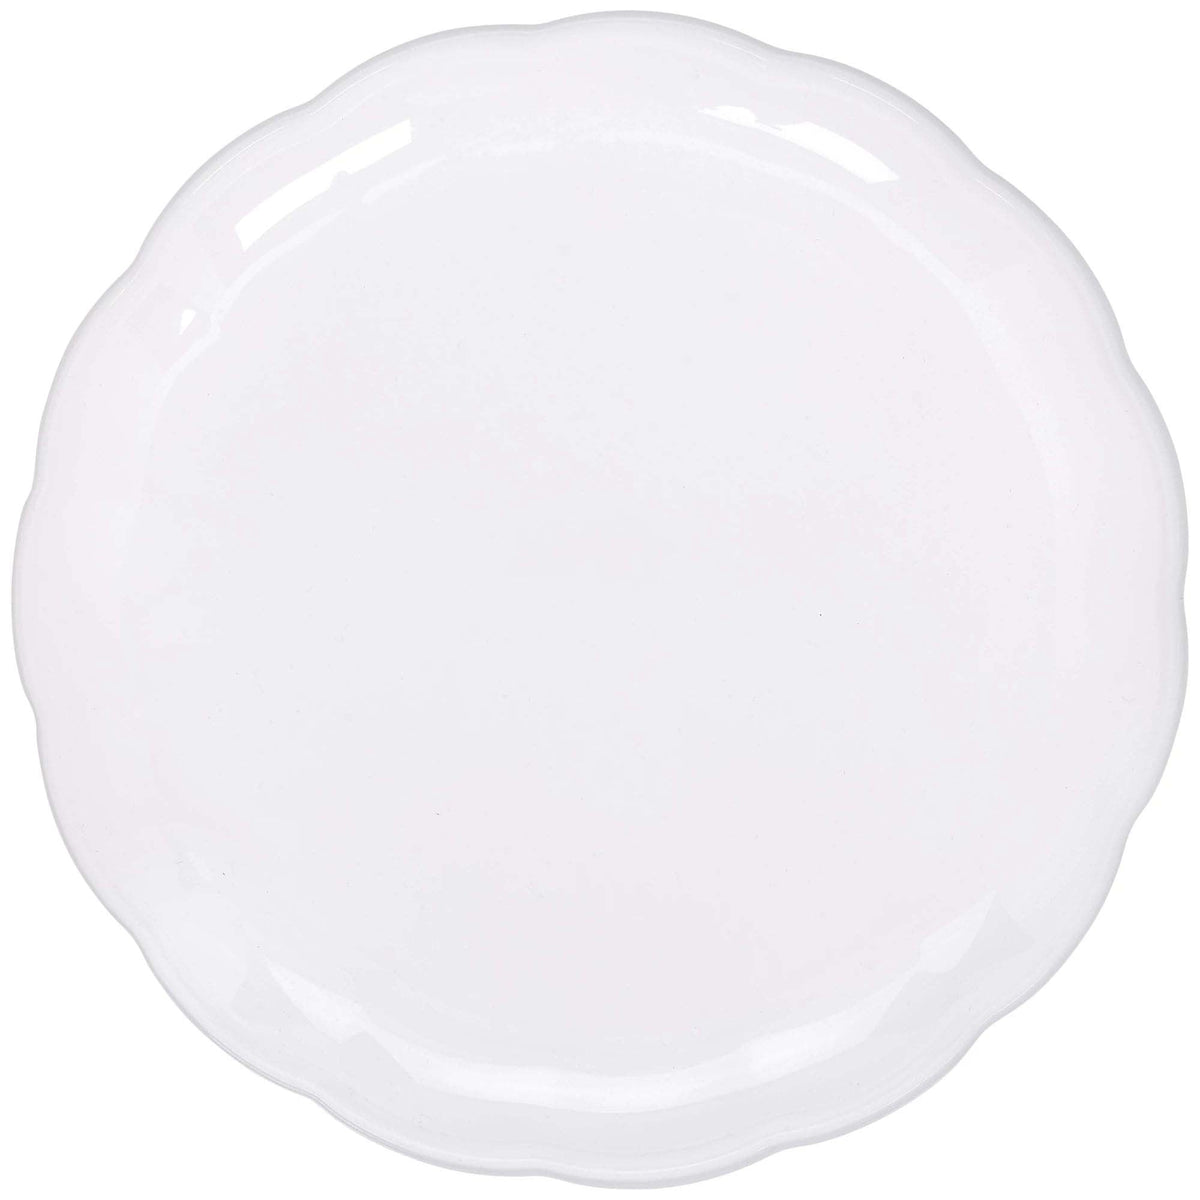 AMSCAN CA Disposable-Plasticware Large Round Scalloped Tray, White, 12 Inches, 1 Count